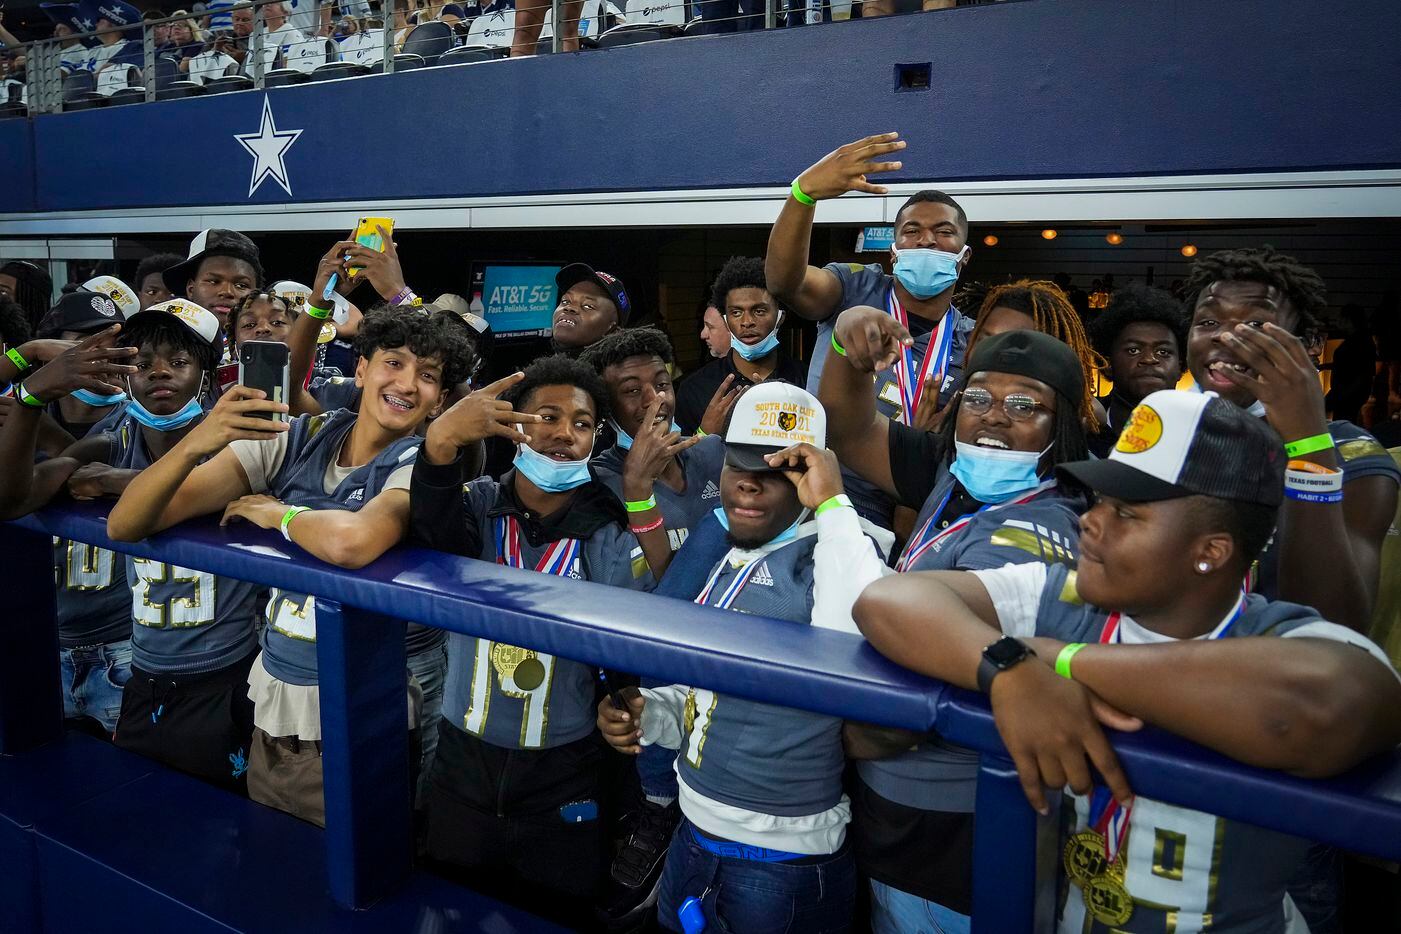 Members of the South Oak Cliff state championship football team cheer as the Dallas Cowboys warm up before the first half of an NFL football game against the Washington Football Team at AT&T Stadium on Sunday, Dec. 26, 2021, in Arlington.